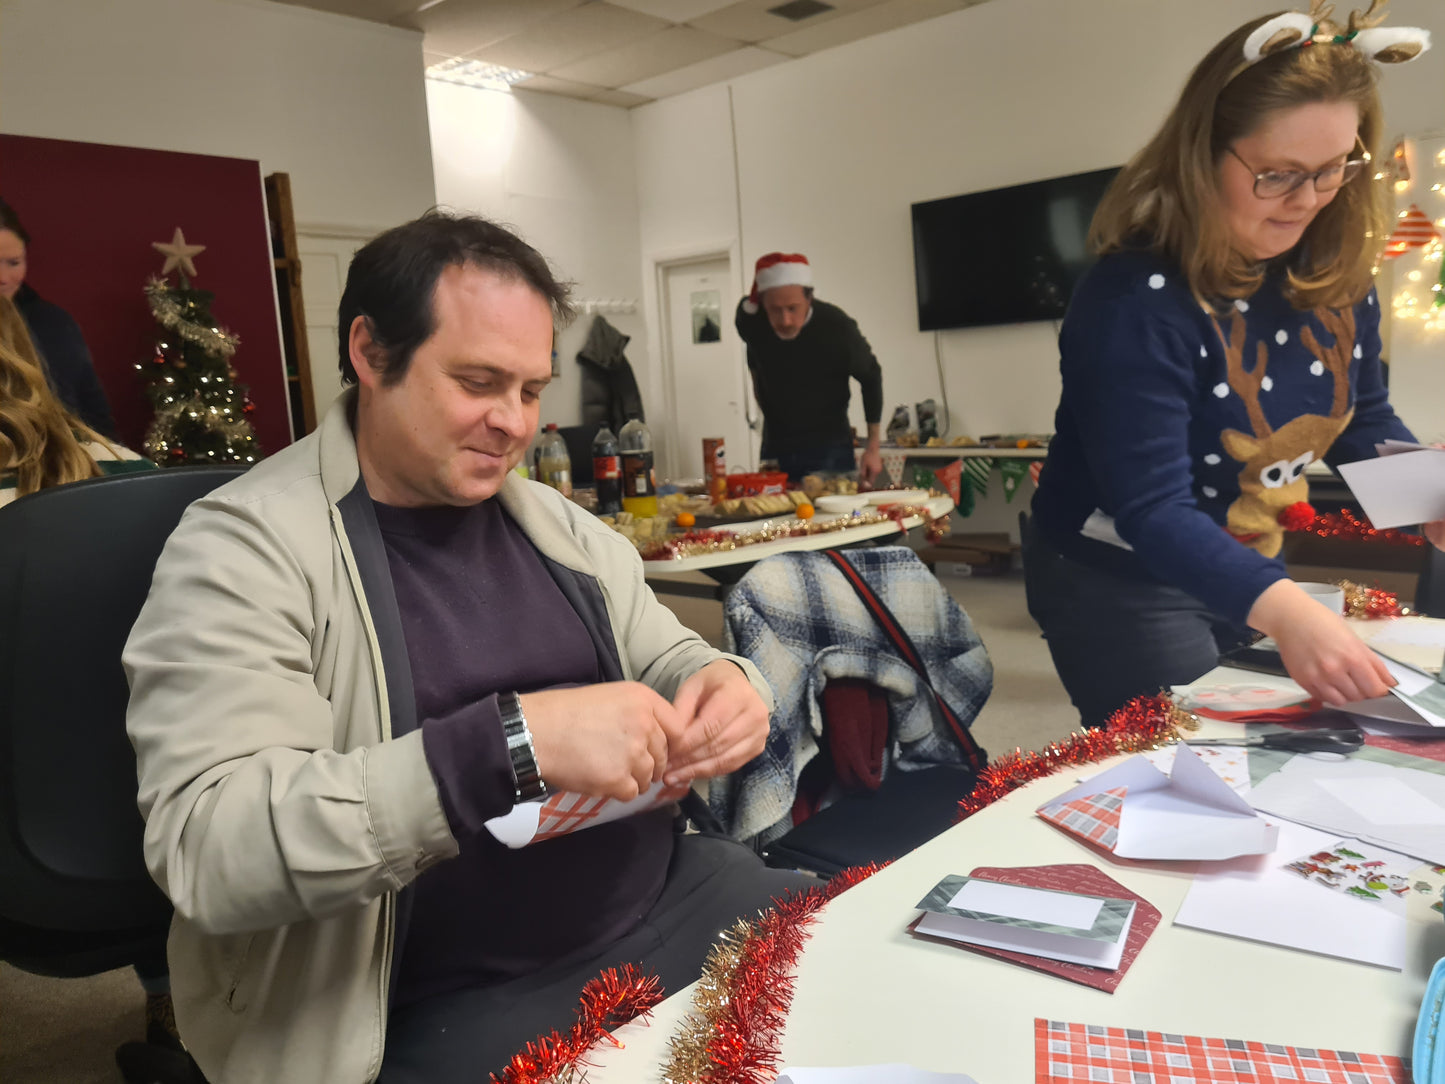 Fund a Christmas party at a night shelter